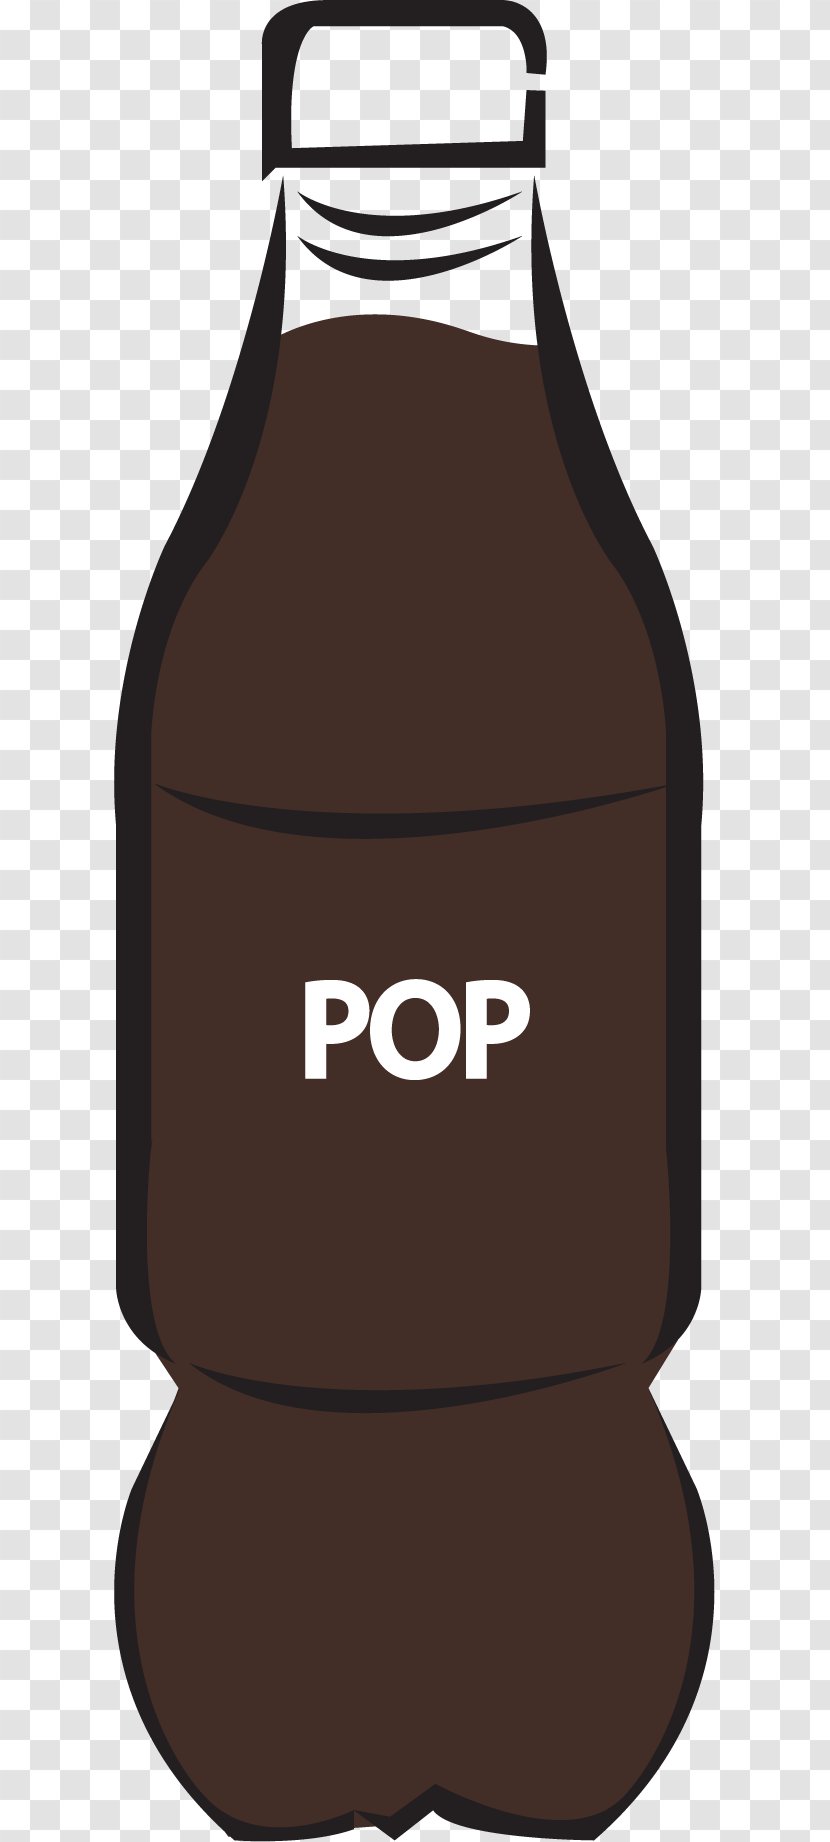 Fizzy Drinks Bottle Sports & Energy Milk - Calculator - Sugary Beverages Transparent PNG